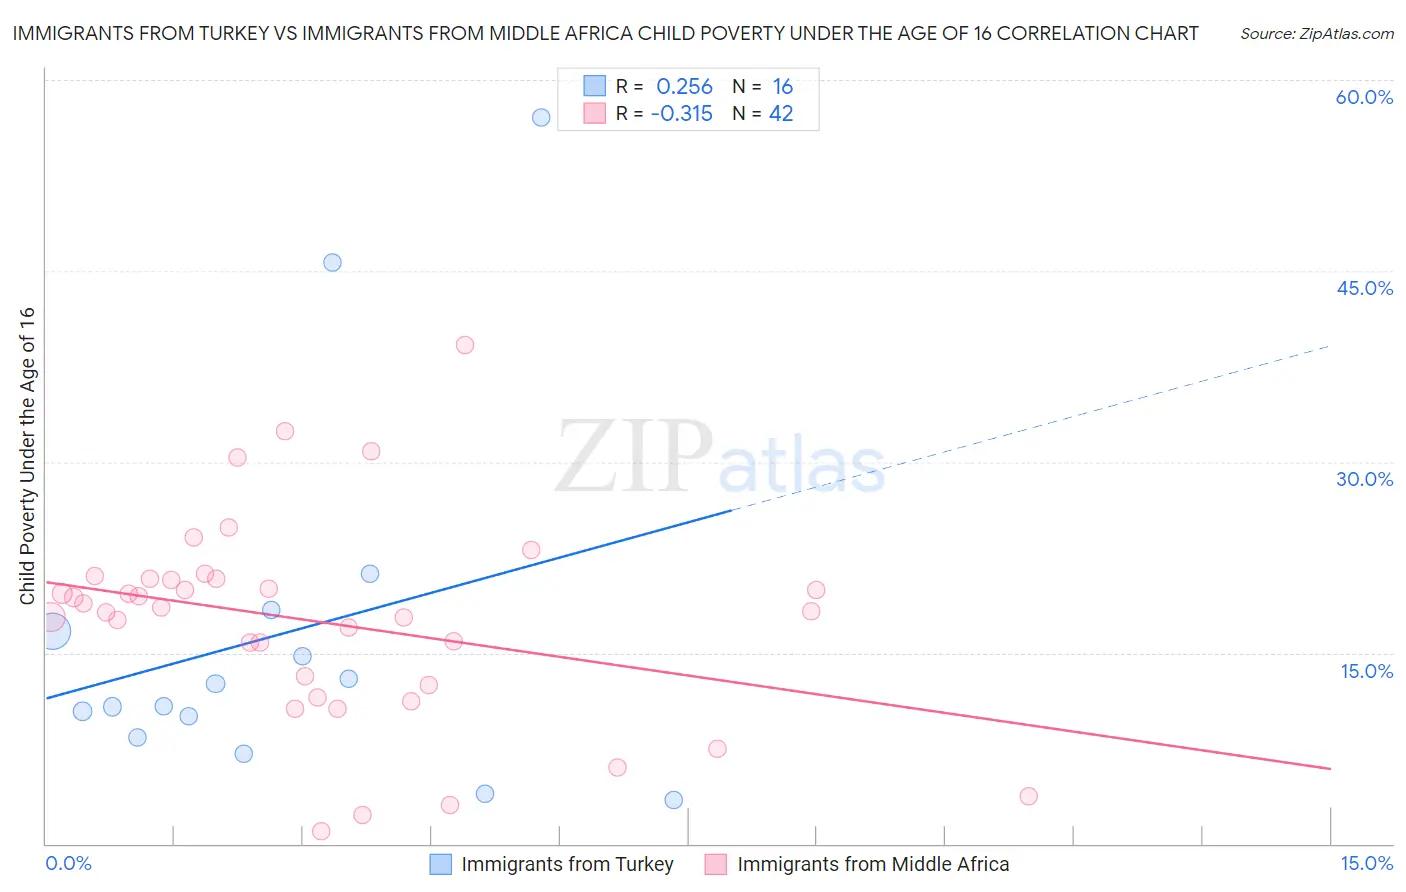 Immigrants from Turkey vs Immigrants from Middle Africa Child Poverty Under the Age of 16